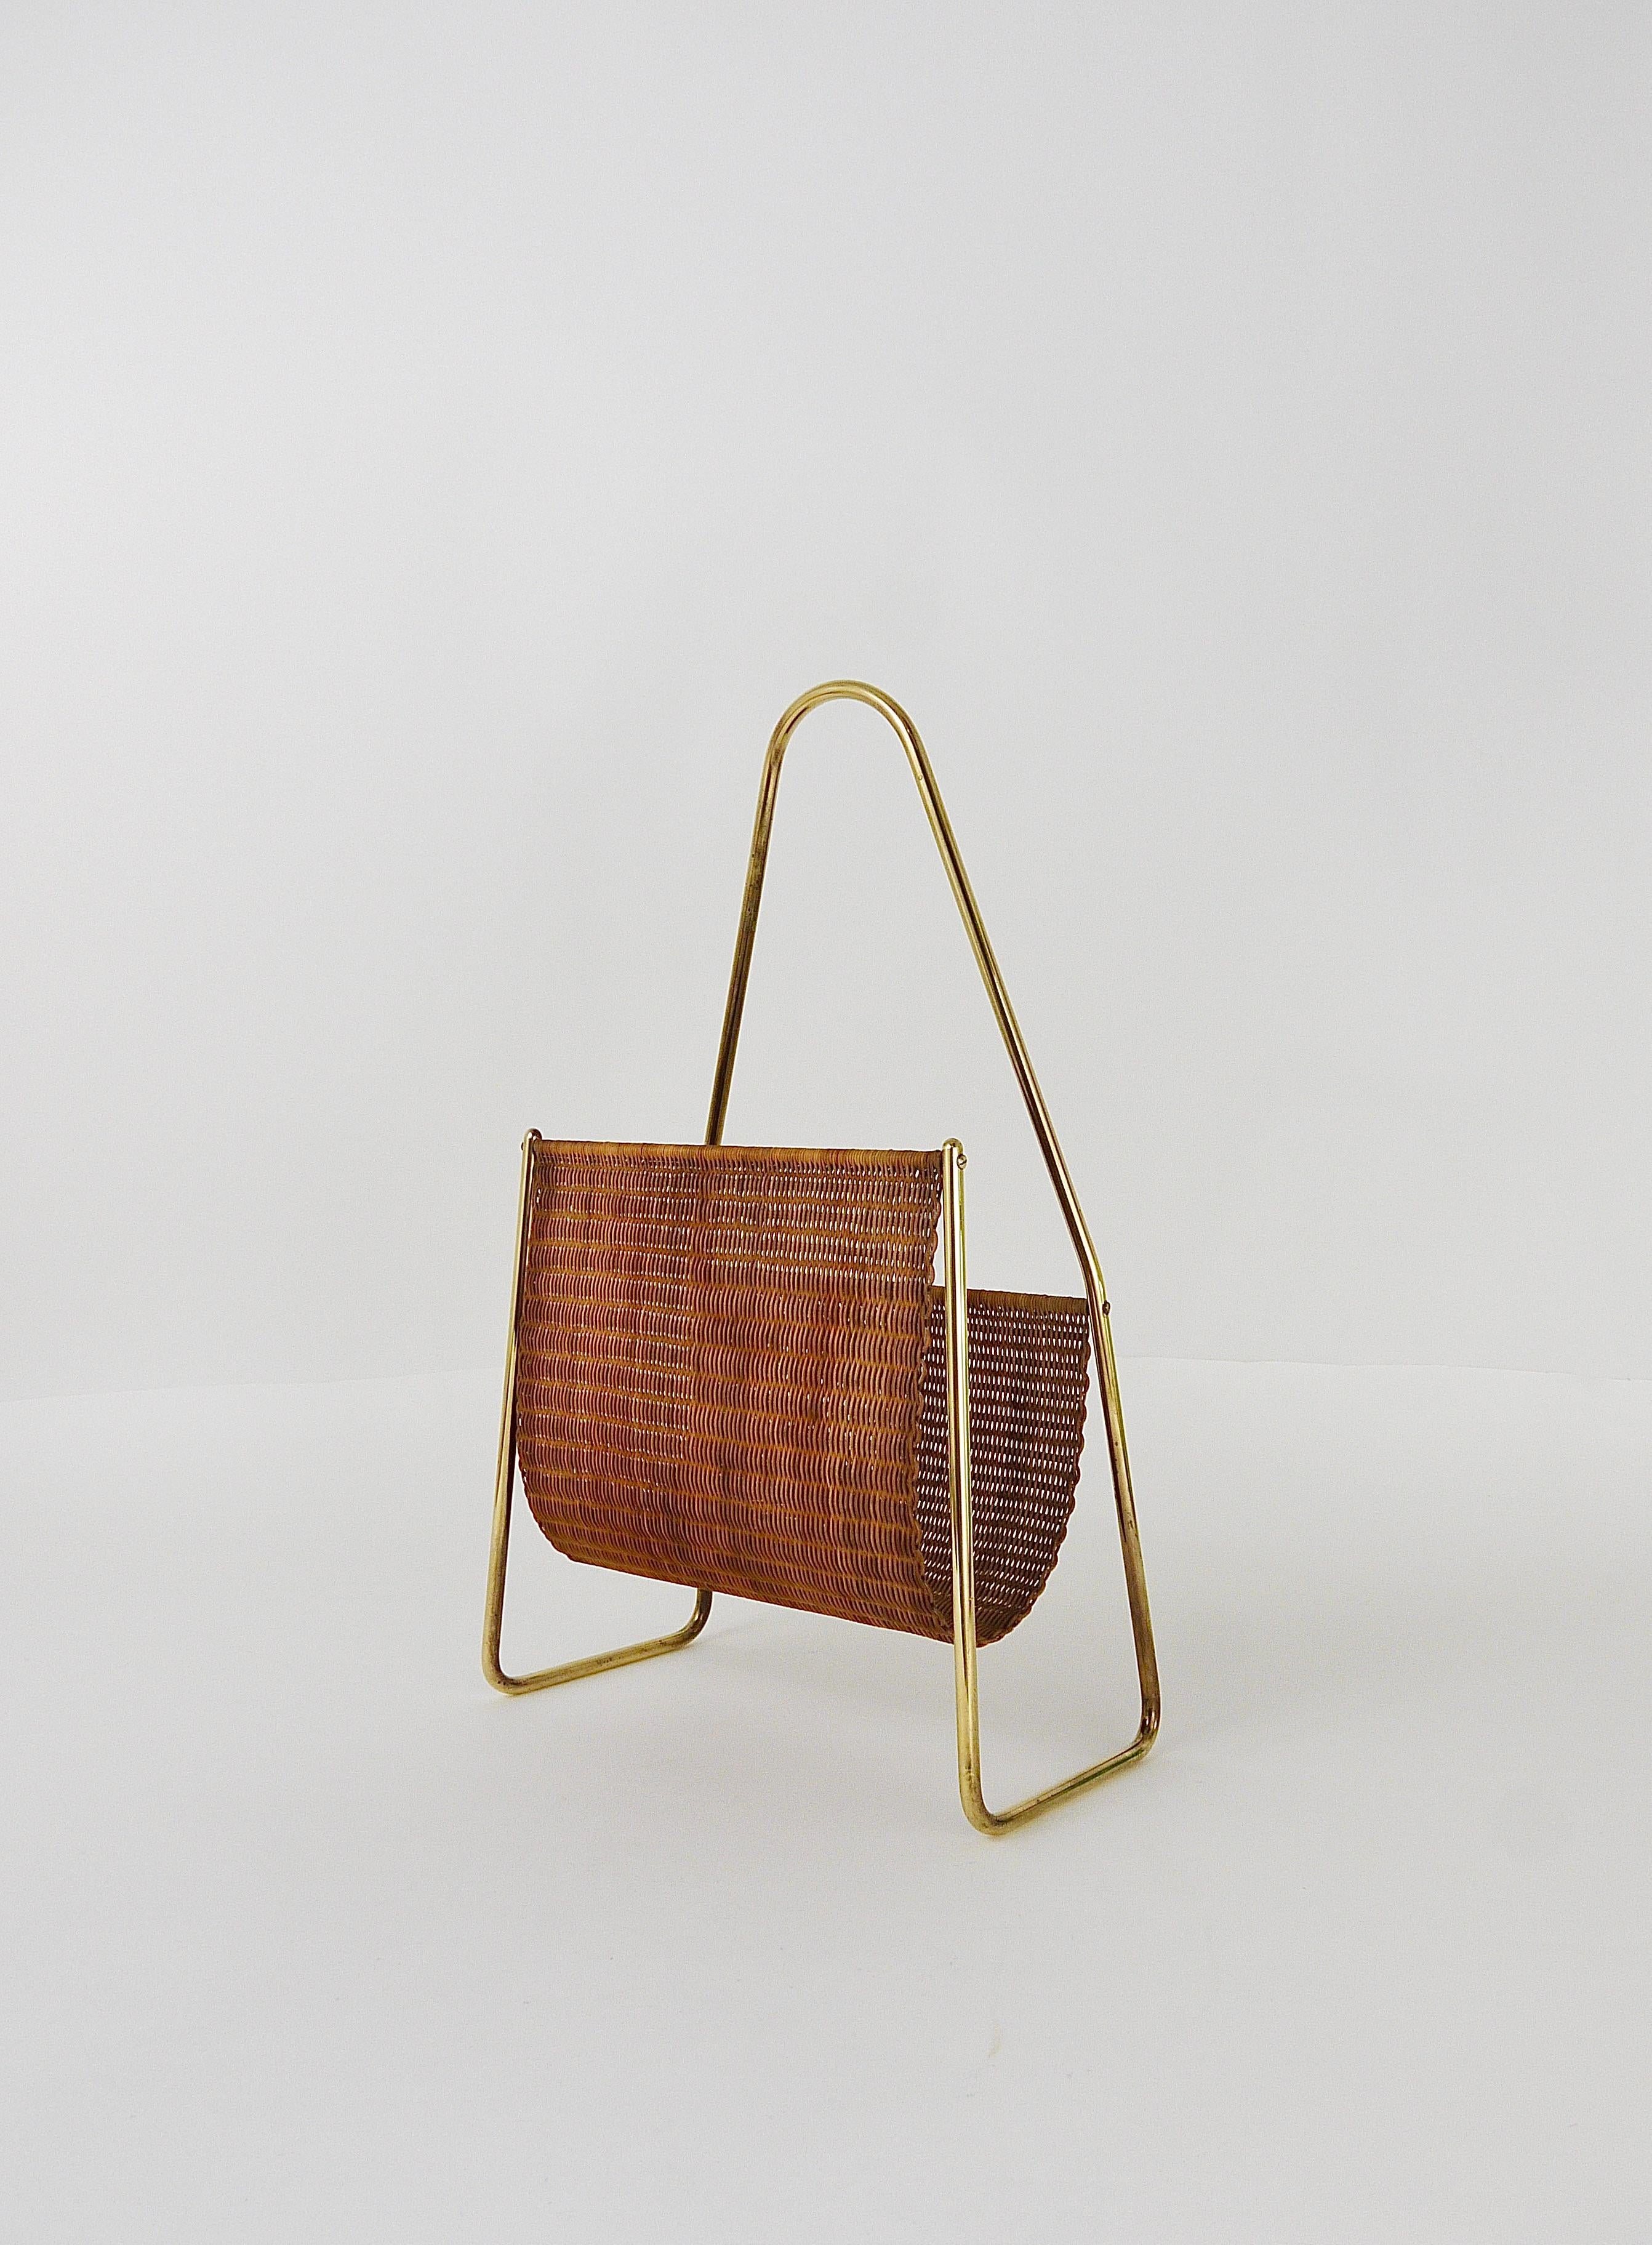 A beautiful modernist original and old newspaper stand / magazine rack from the 1950s. Model No. 3808. Designed and manufactured by Carl Auböck, Austria. The solid brass has been gently polished by hand and shows marginal patina, the handwoven